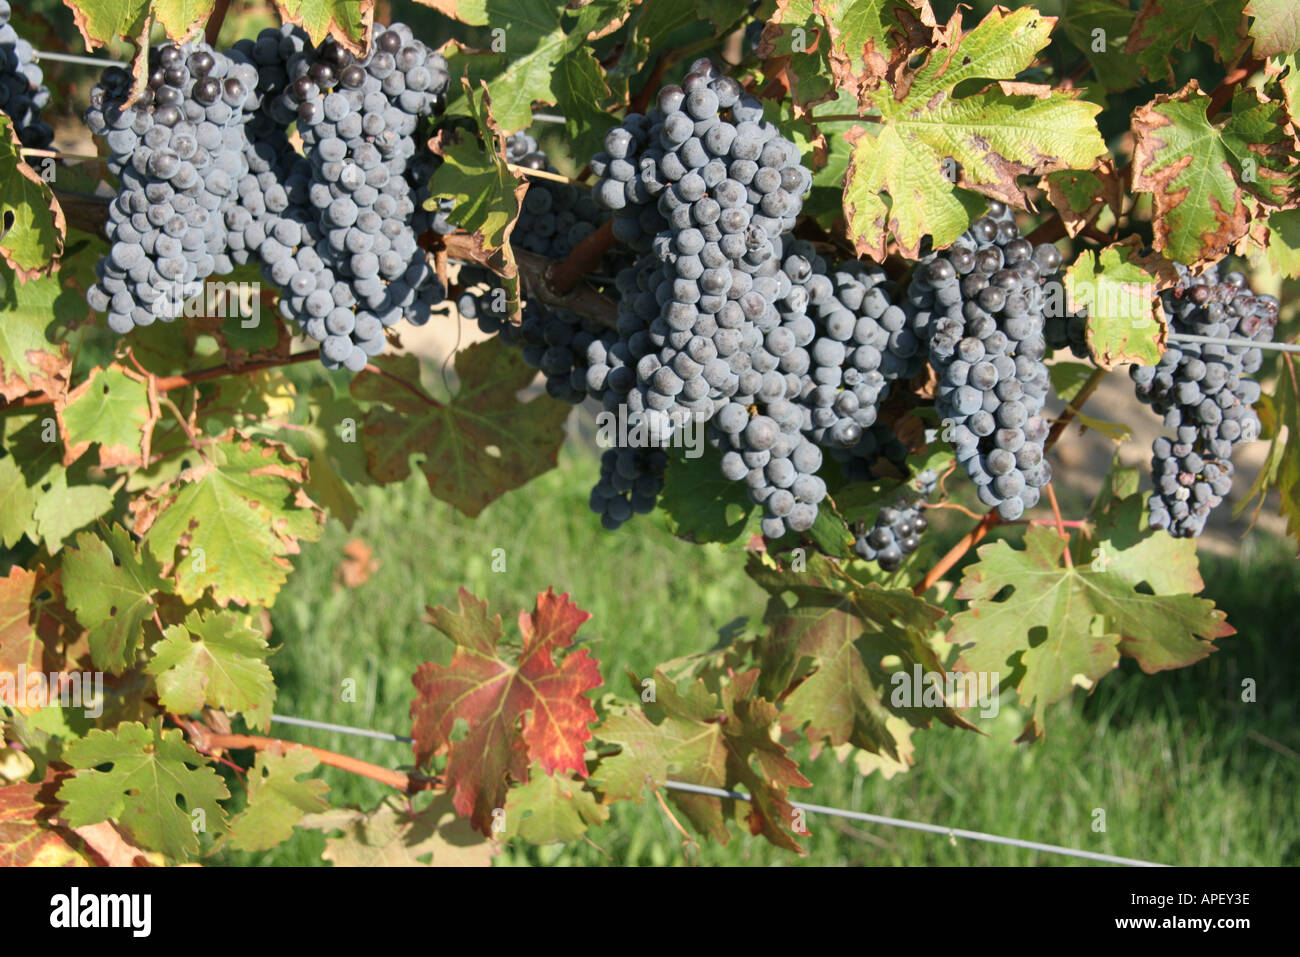 Michigan,MI,Mich,Upper Midwest,Berrien Springs,Domaine Berrien Cellars,grapes,vineyard,vineyards,grape,growing,agriculture,rural,country,countryside,v Stock Photo